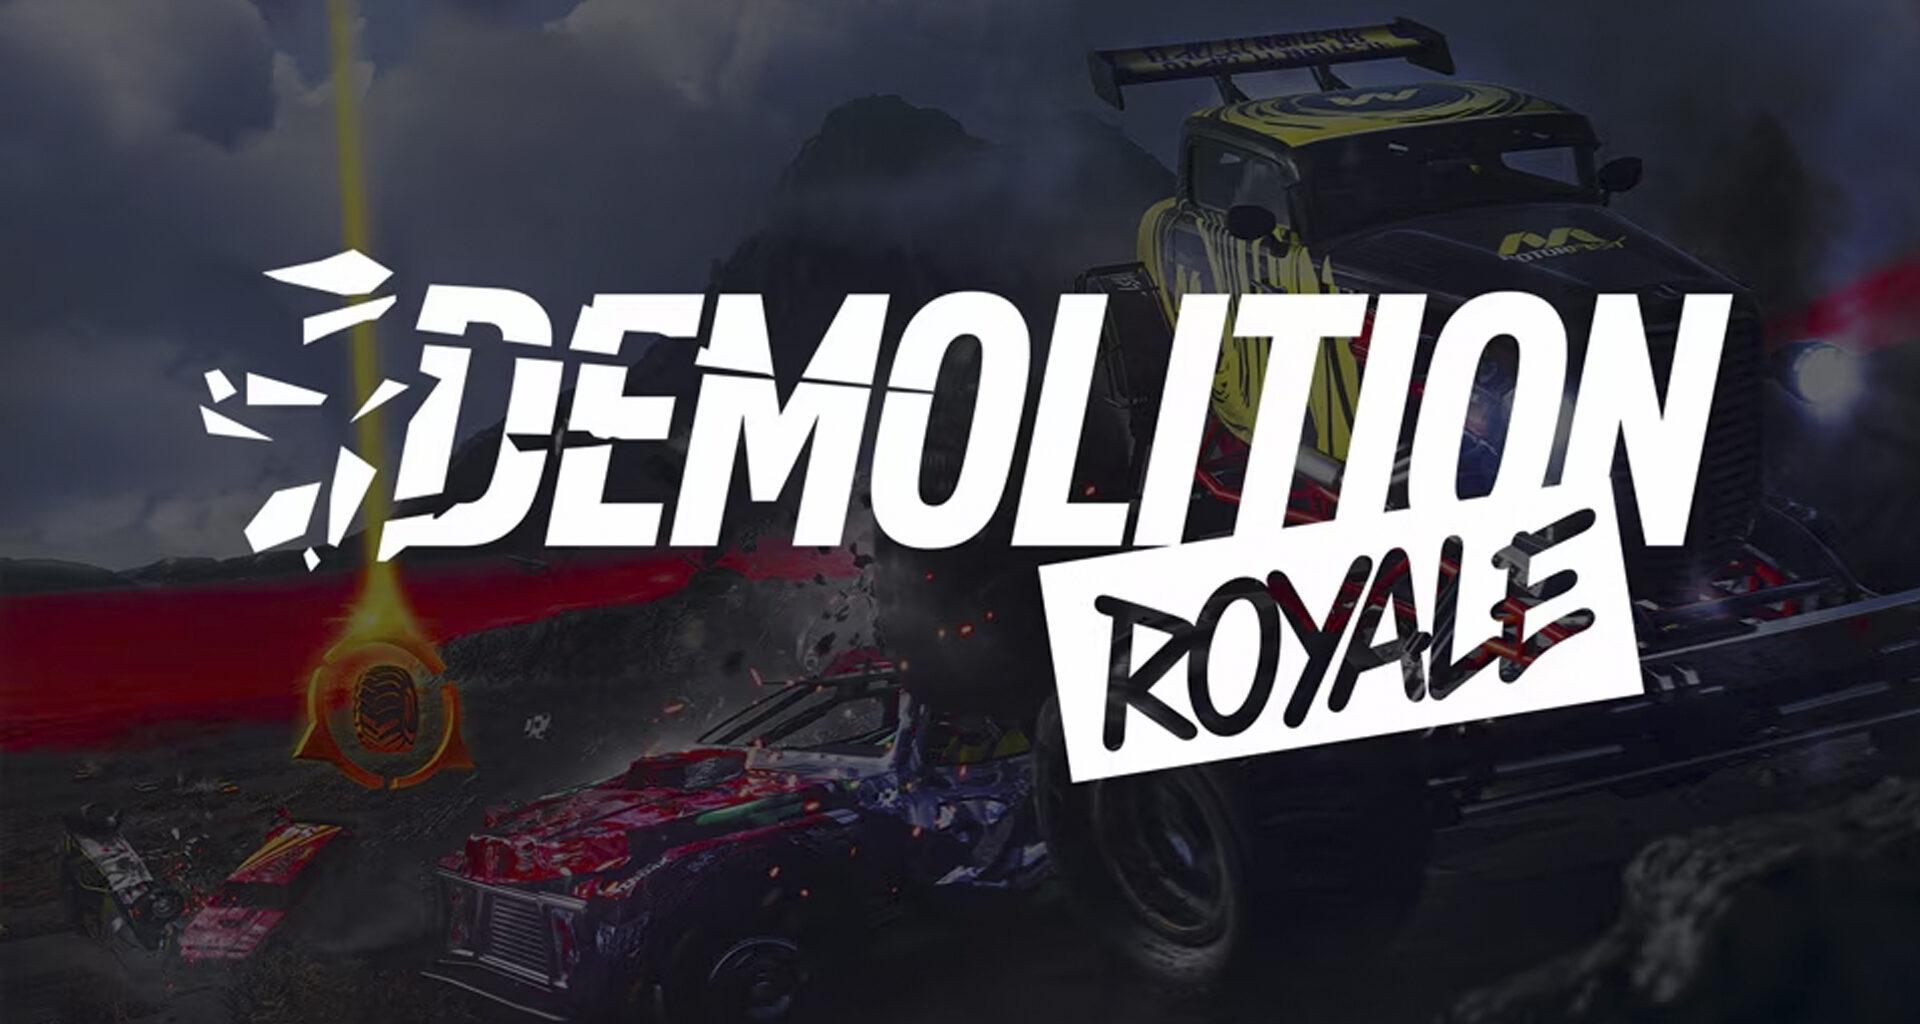 The Crew Motorfest Demolition Royale guide - Fortnite with cars 02